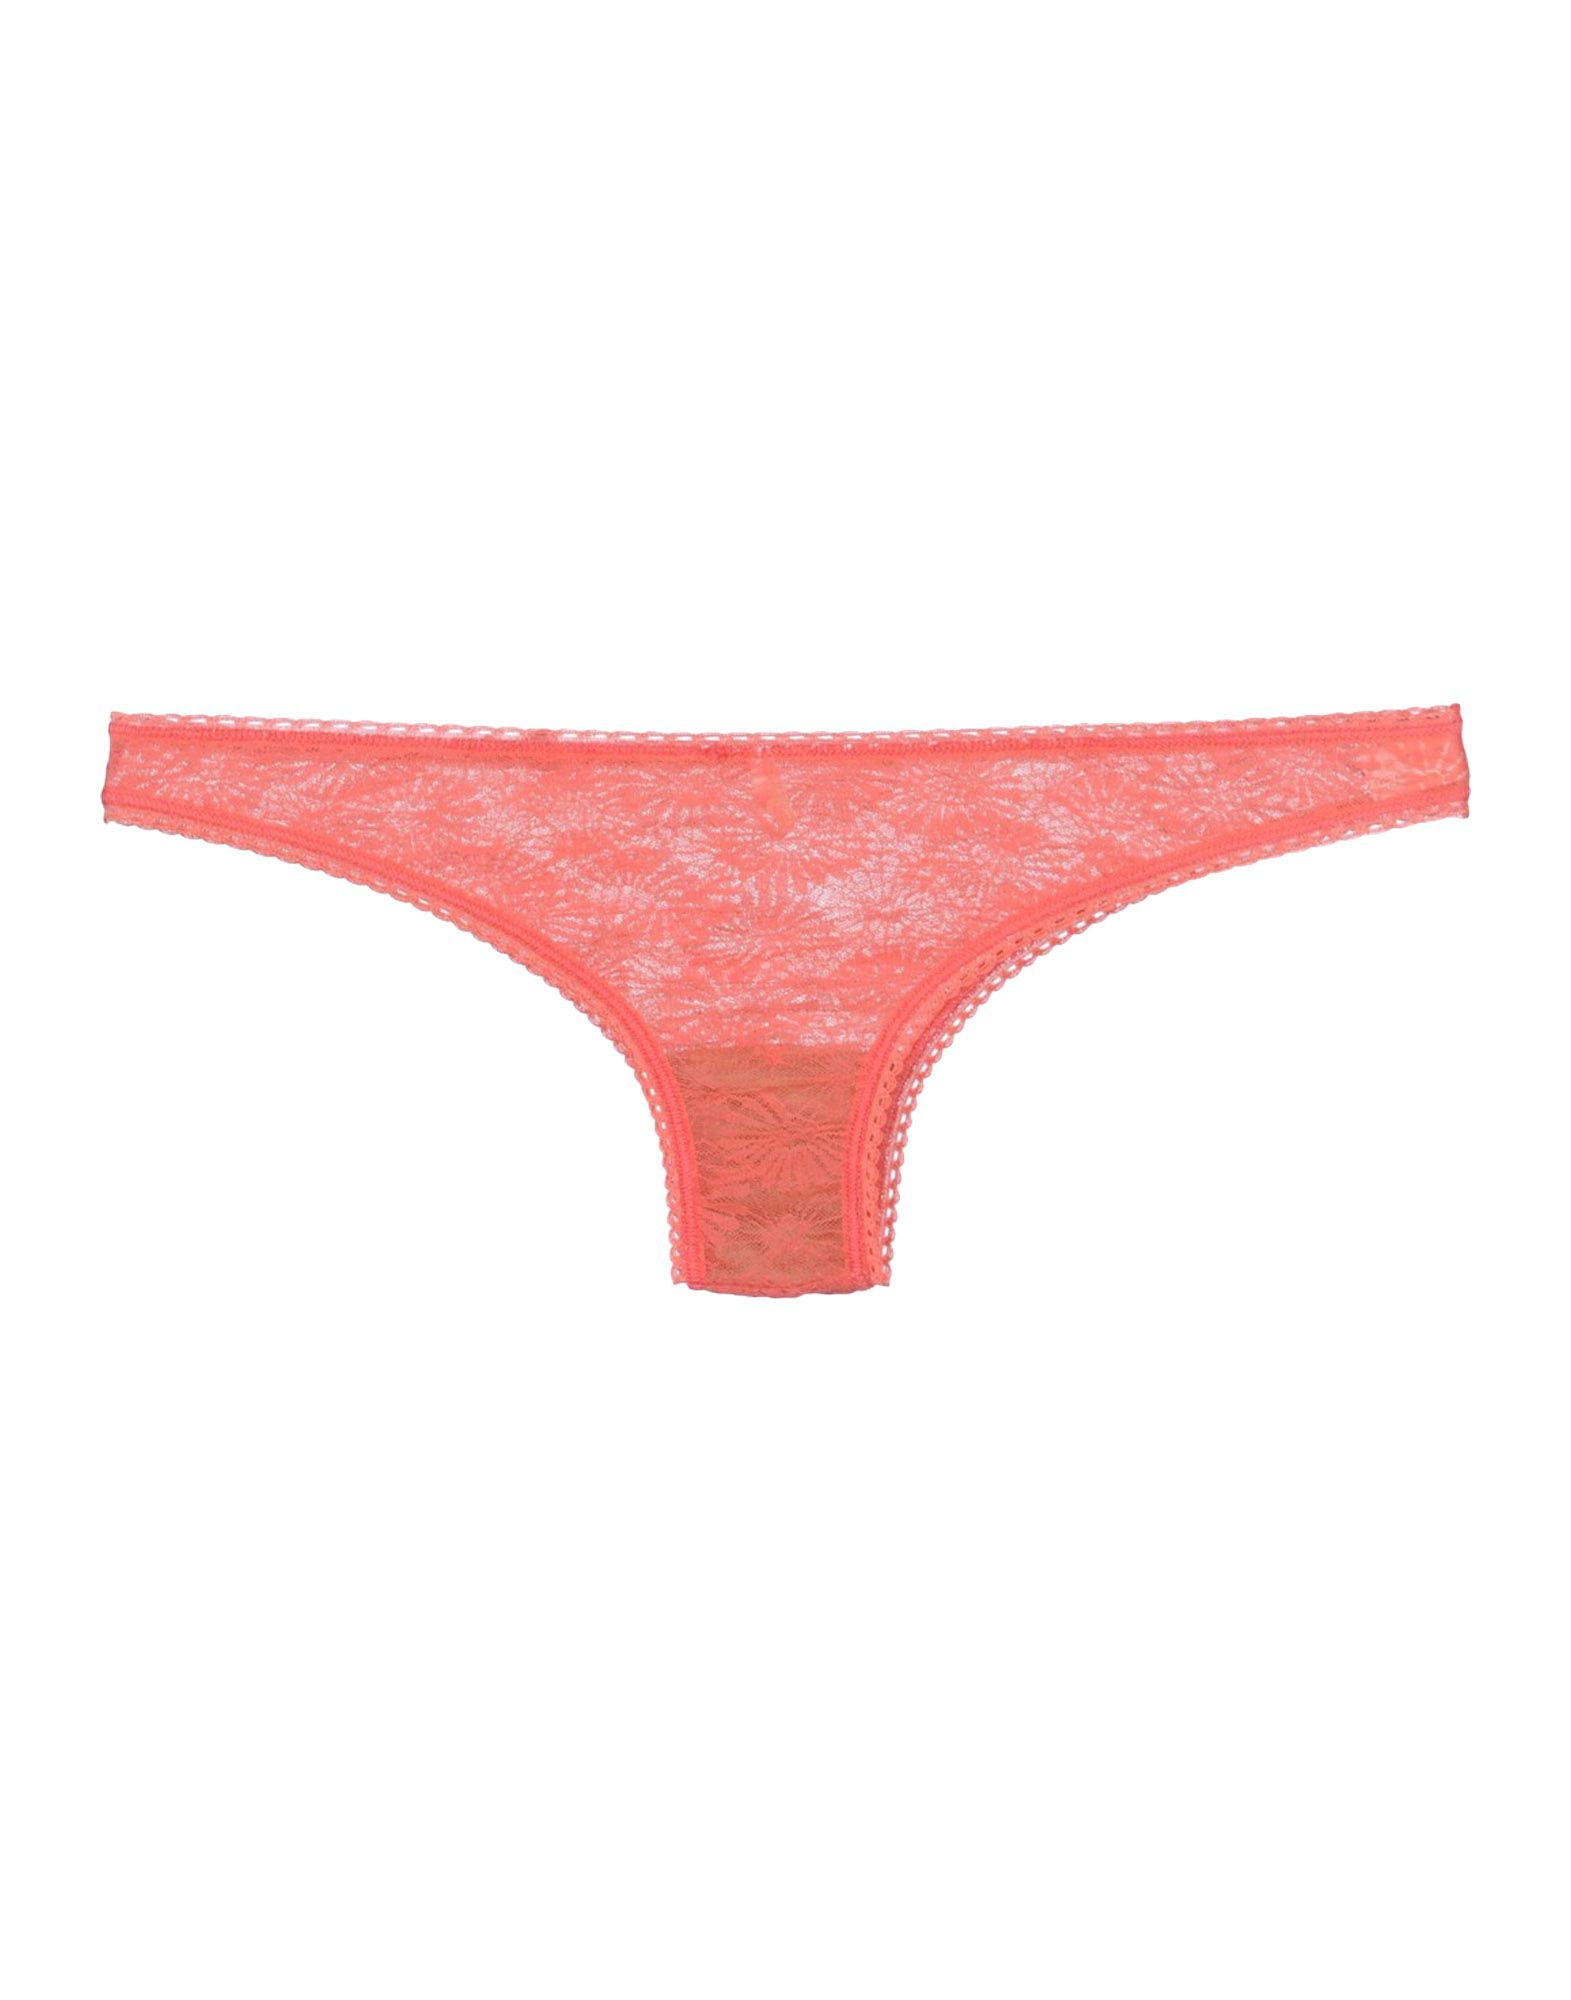 Momoní Brief in Pink (Coral) - Save 4% | Lyst